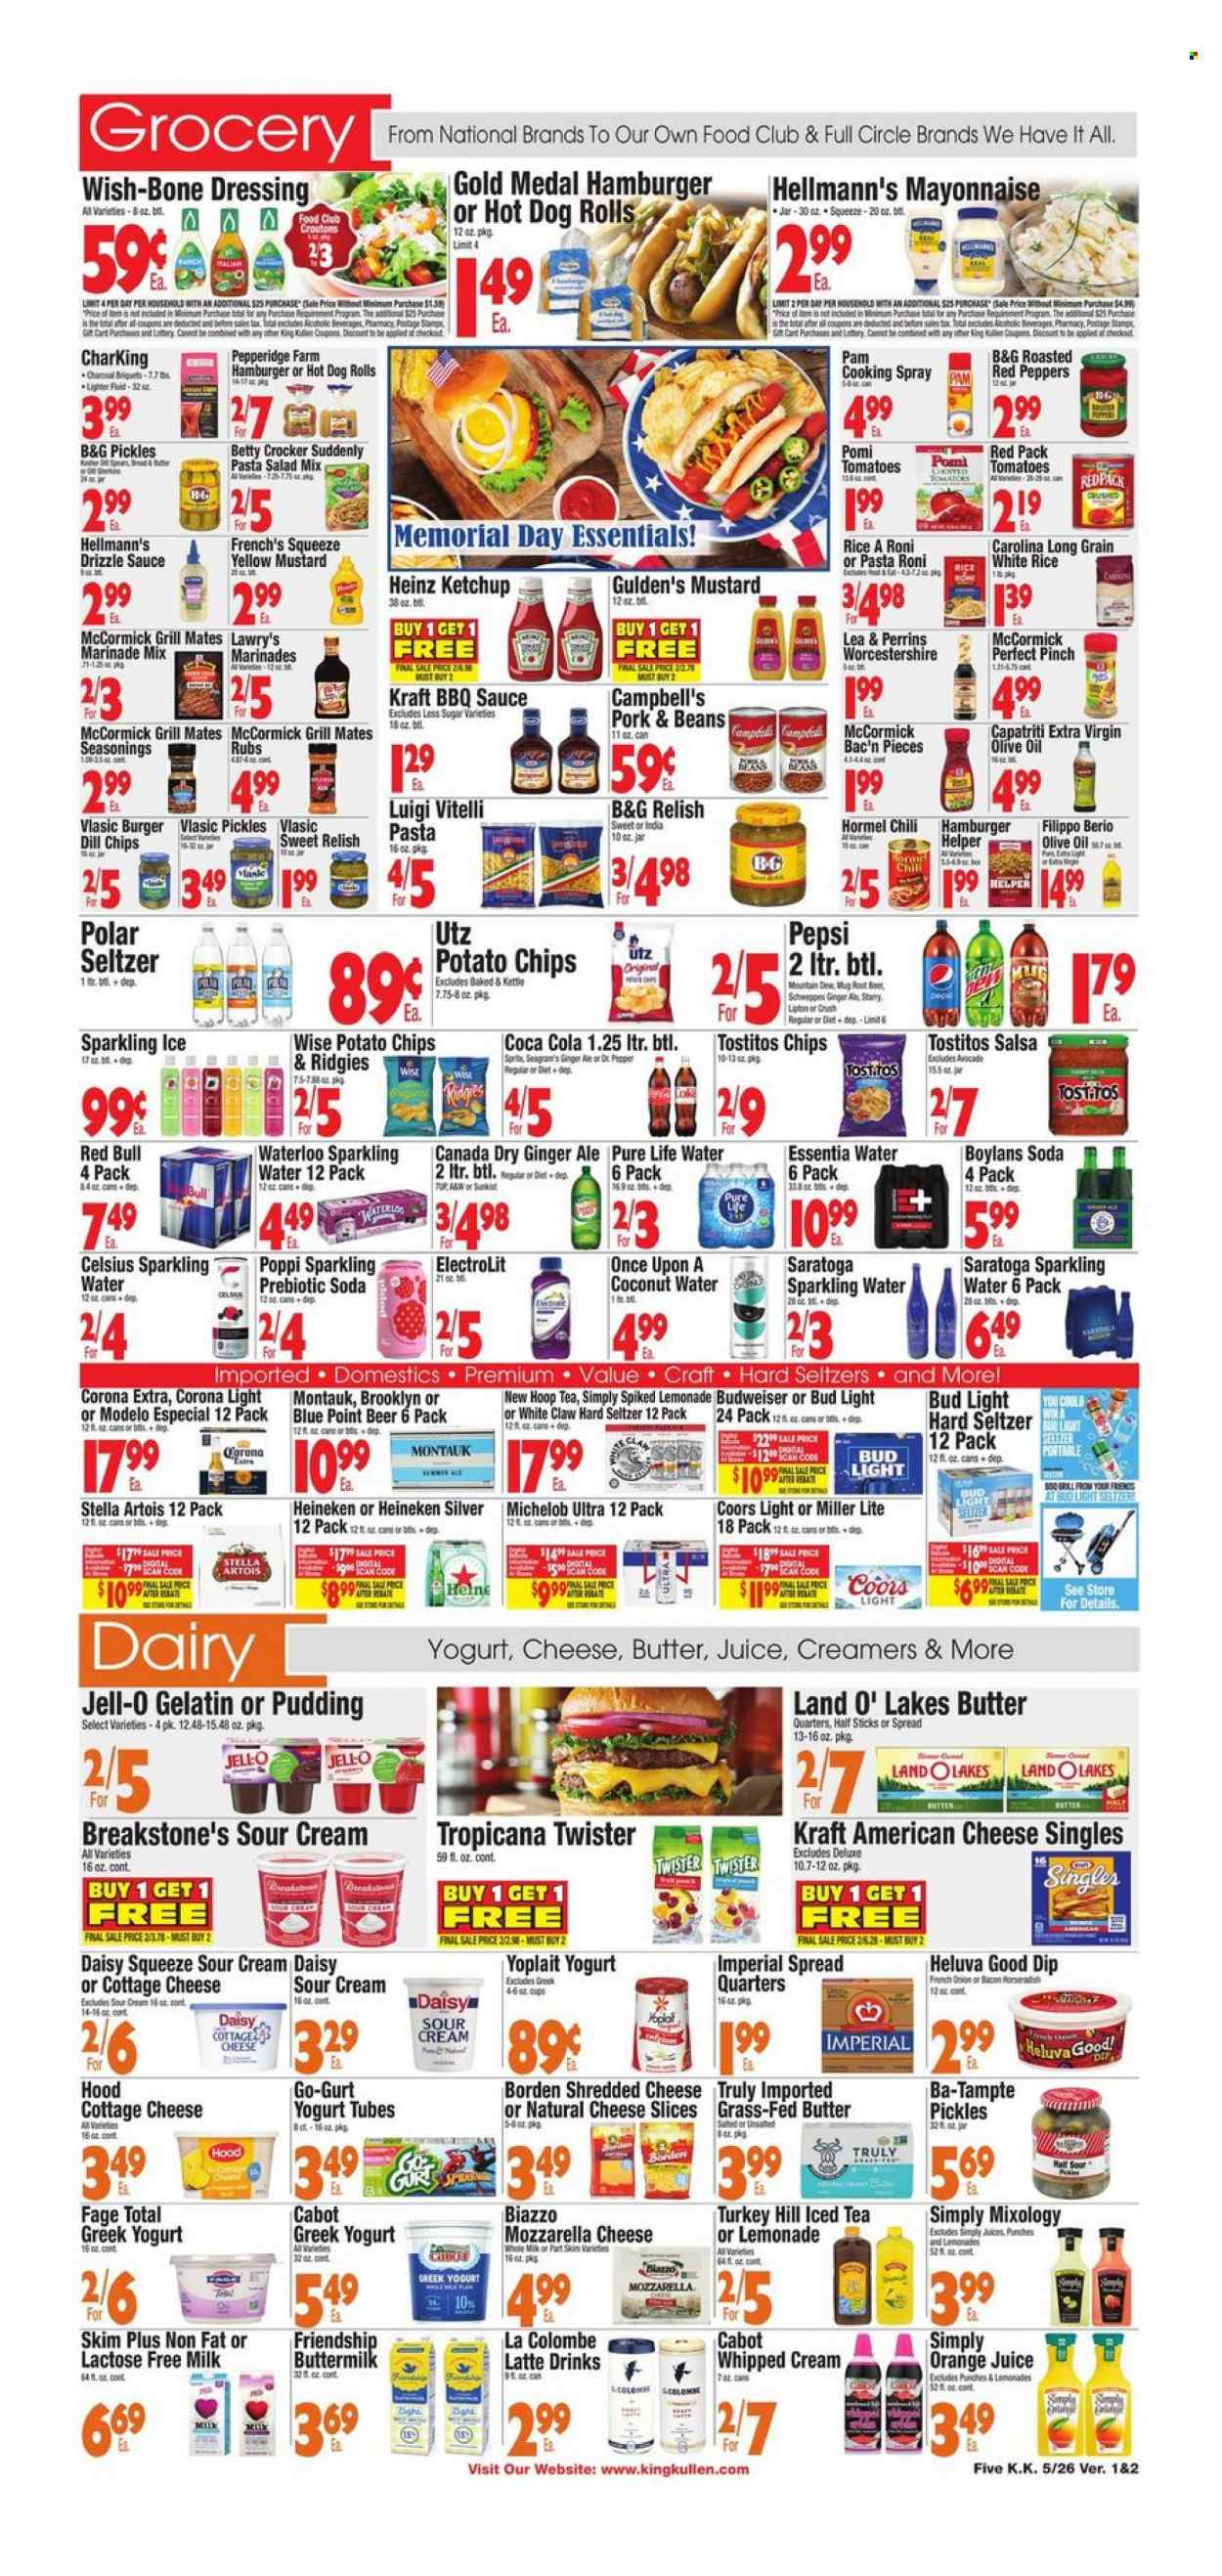 thumbnail - King Kullen Flyer - 05/26/2023 - 06/01/2023 - Sales products - hot dog rolls, beans, onion, salad, peppers, red peppers, avocado, Campbell's, sauce, Kraft®, Hormel, ready meal, pasta salad, american cheese, cottage cheese, shredded cheese, sliced cheese, cheese, greek yoghurt, pudding, yoghurt, Yoplait, buttermilk, lactose free milk, sour cream, whipped cream, mayonnaise, dip, Hellmann’s, potato chips, chips, Tostitos, croutons, Jell-O, Heinz, pickles, rice, white rice, dill, BBQ sauce, mustard, worcestershire sauce, ketchup, dressing, salsa, marinade, cooking spray, extra virgin olive oil, olive oil, Canada Dry, Coca-Cola, ginger ale, lemonade, Mountain Dew, Schweppes, Sprite, Pepsi, orange juice, juice, energy drink, Lipton, ice tea, soft drink, Red Bull, Tropicana Twister, flavored water, soda, sparkling water, Pure Life Water, water, alcohol, White Claw, Hard Seltzer, TRULY, Stella Artois, Bud Light, Corona Extra, Heineken, Modelo, turkey, Budweiser, Miller Lite, Coors, Michelob. Page 5.